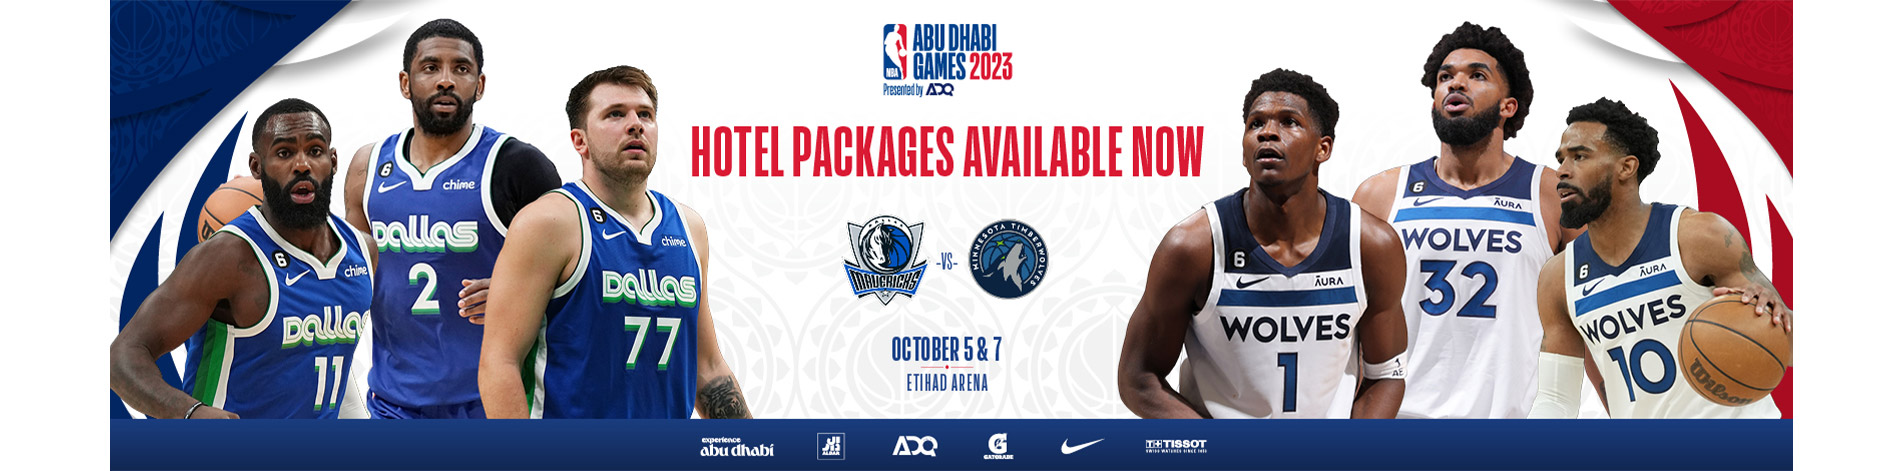 NBA Abu Dhabi Tickets and Hotel Packages 2023